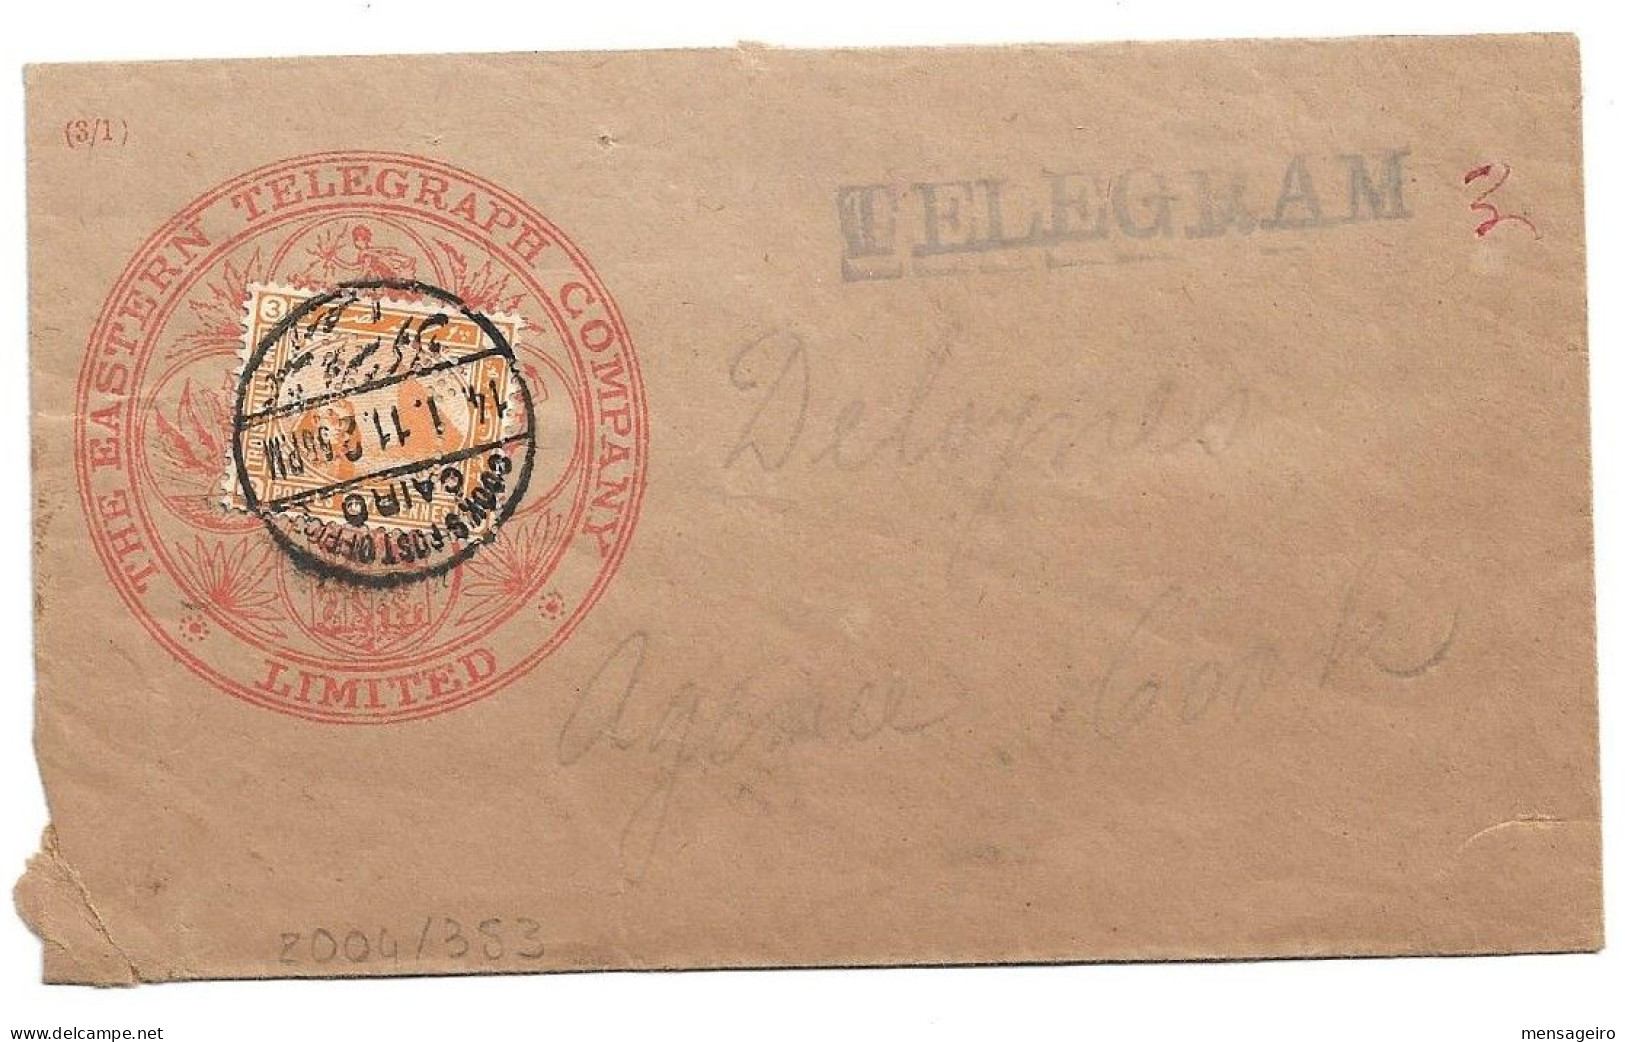 (C04) EASTERN TELEGRAM COVER WITH 3M. STAMP PERFIN "T C/ & S" (INVERTED) - COOKS POST OFFICE / CAIRO => COOK AGENCY - 1866-1914 Khedivato Di Egitto